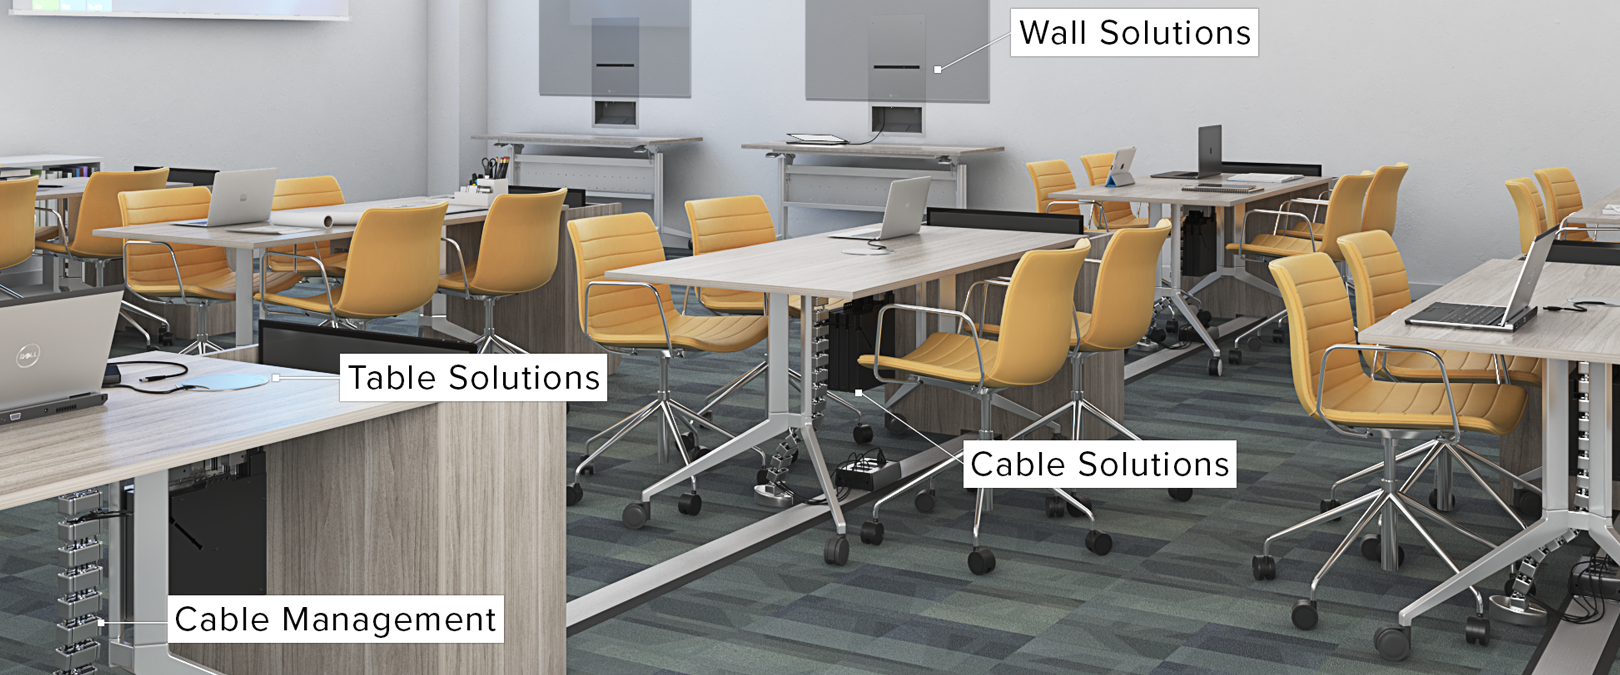 Classroom-Solutions-1620x675 Dorms- Not Just For Sleeping Anymore - FSR, Inc. - AV Connectivity Solutions